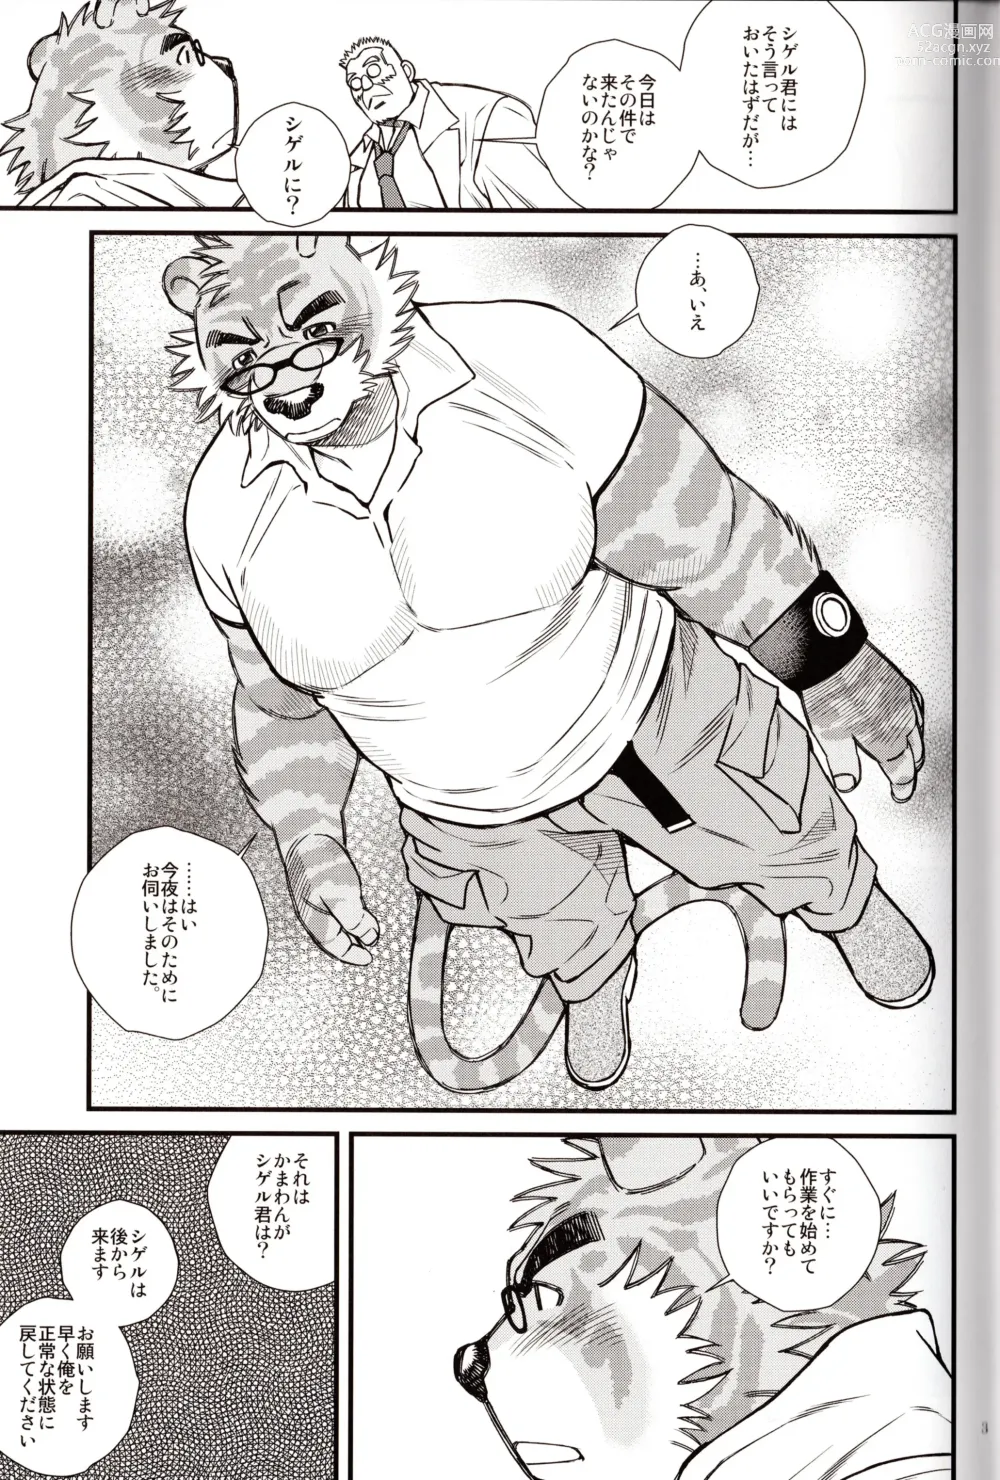 Page 4 of doujinshi Animal Synchronicity 9